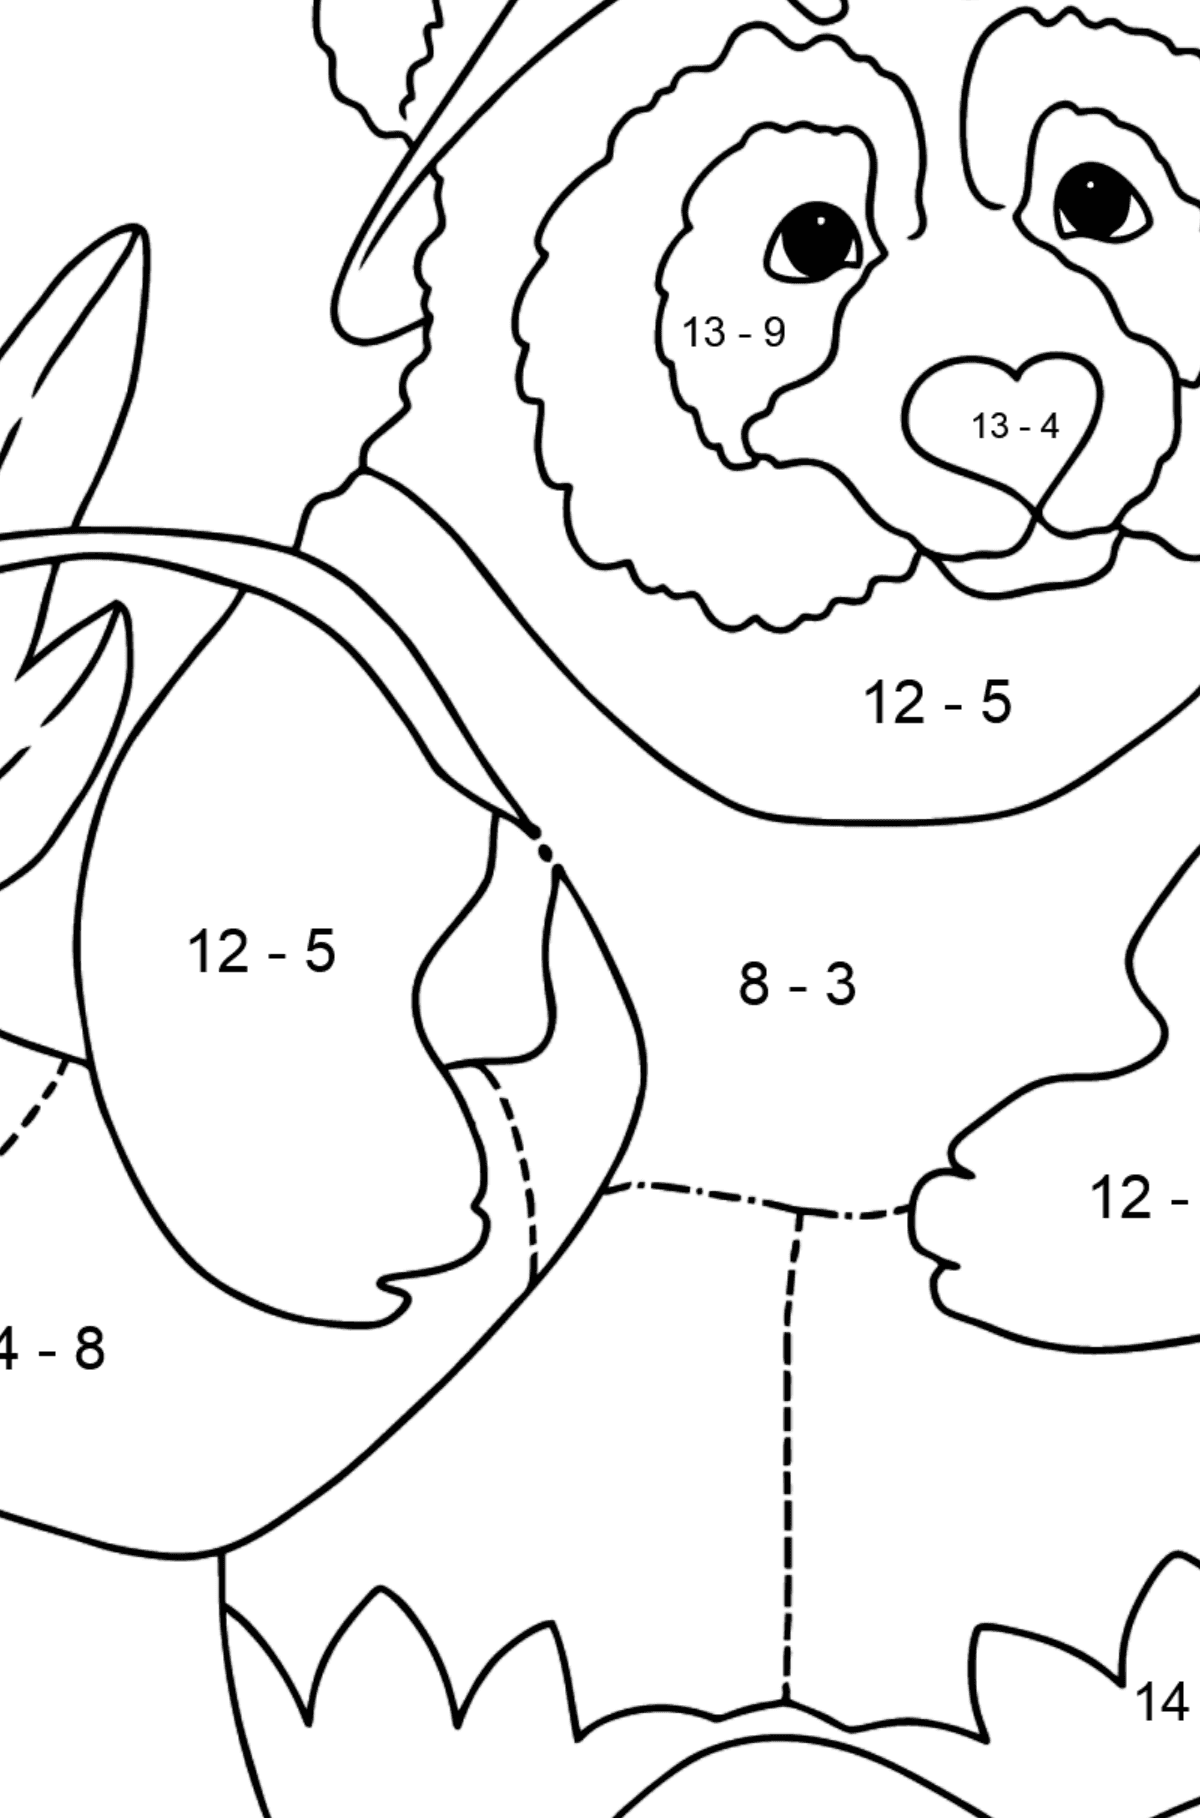 Good Panda (Simple) coloring page - Math Coloring - Subtraction for Kids